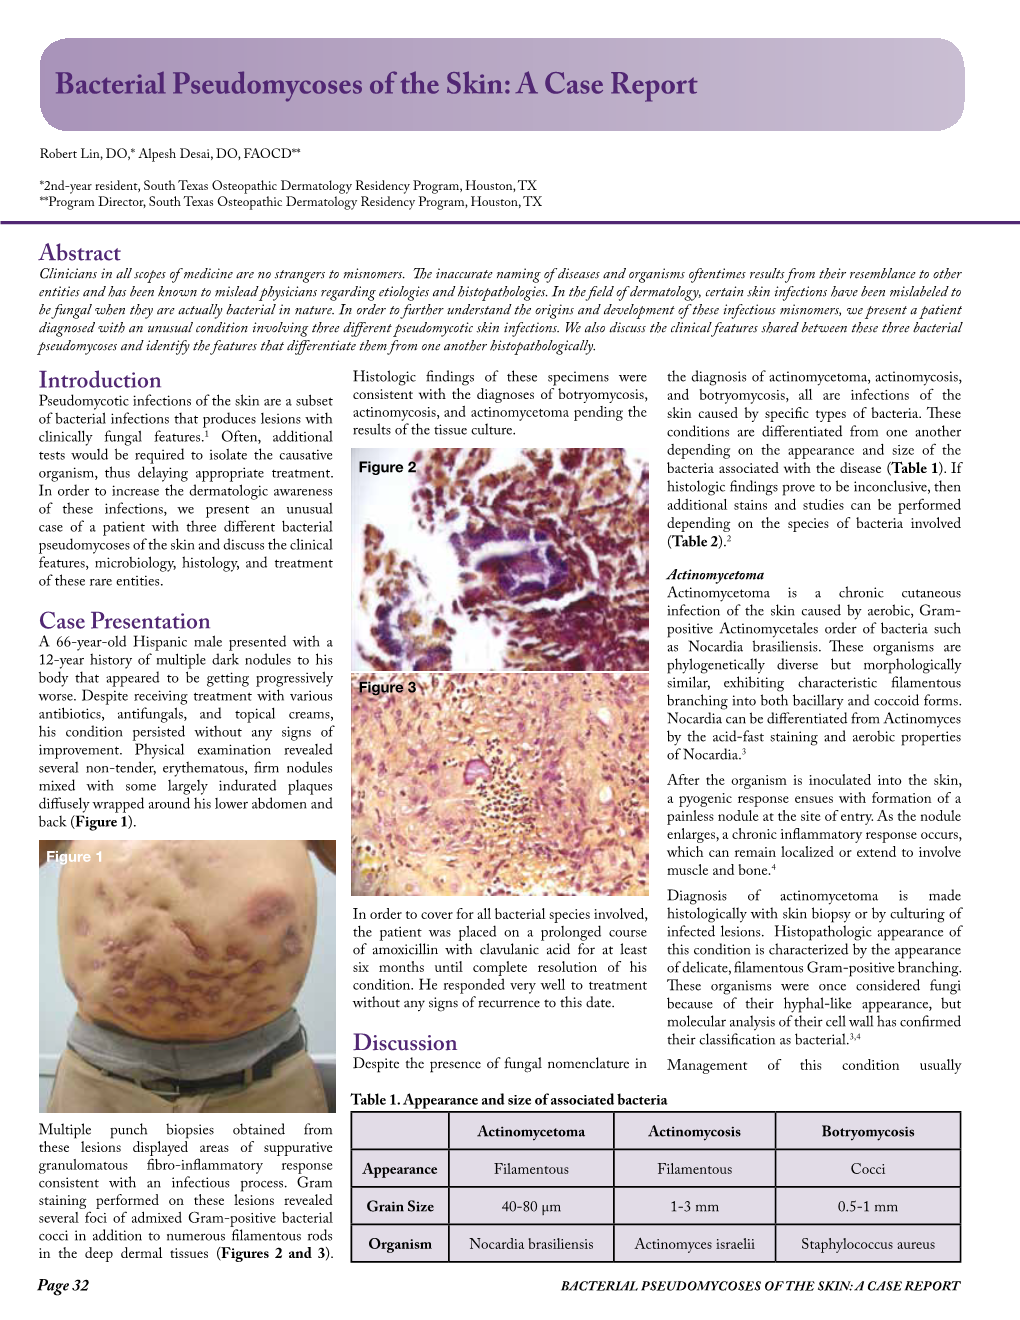 Bacterial Pseudomycoses of the Skin: a Case Report